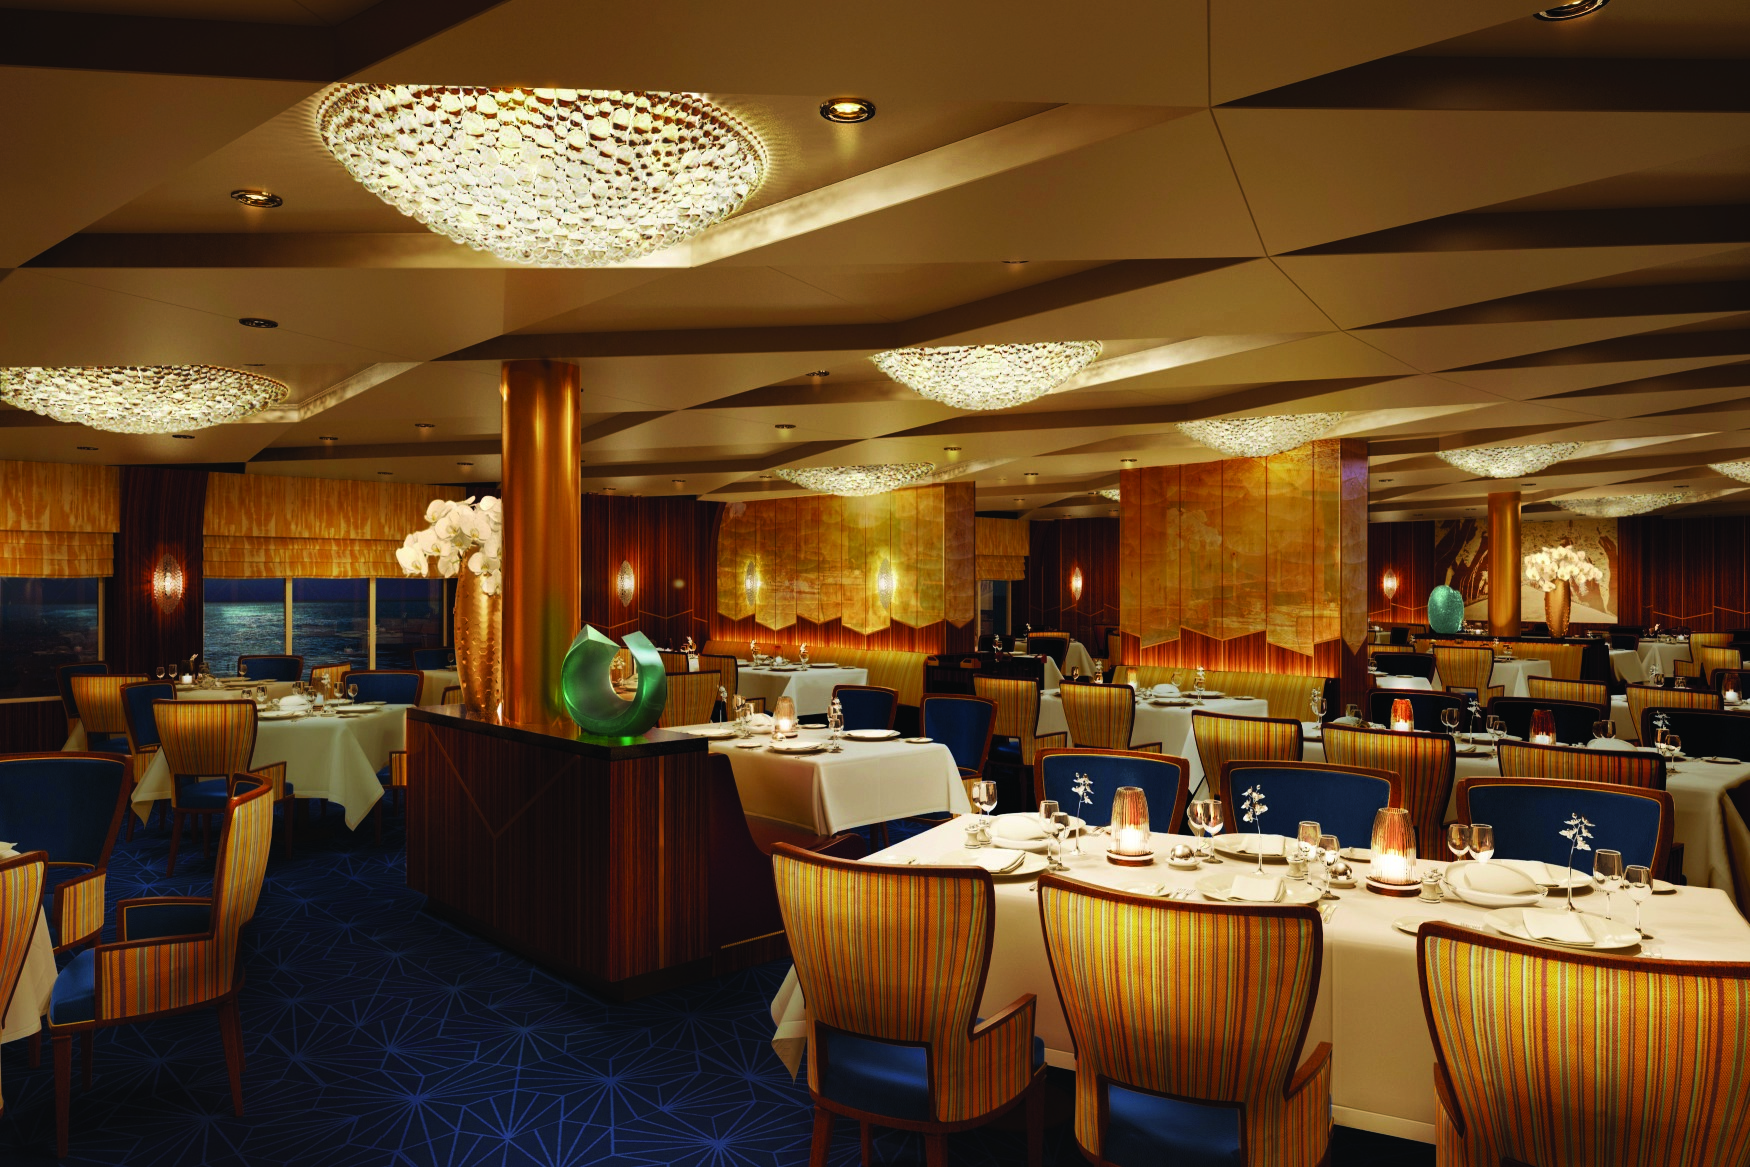 Dining room in the ms Koningsdam